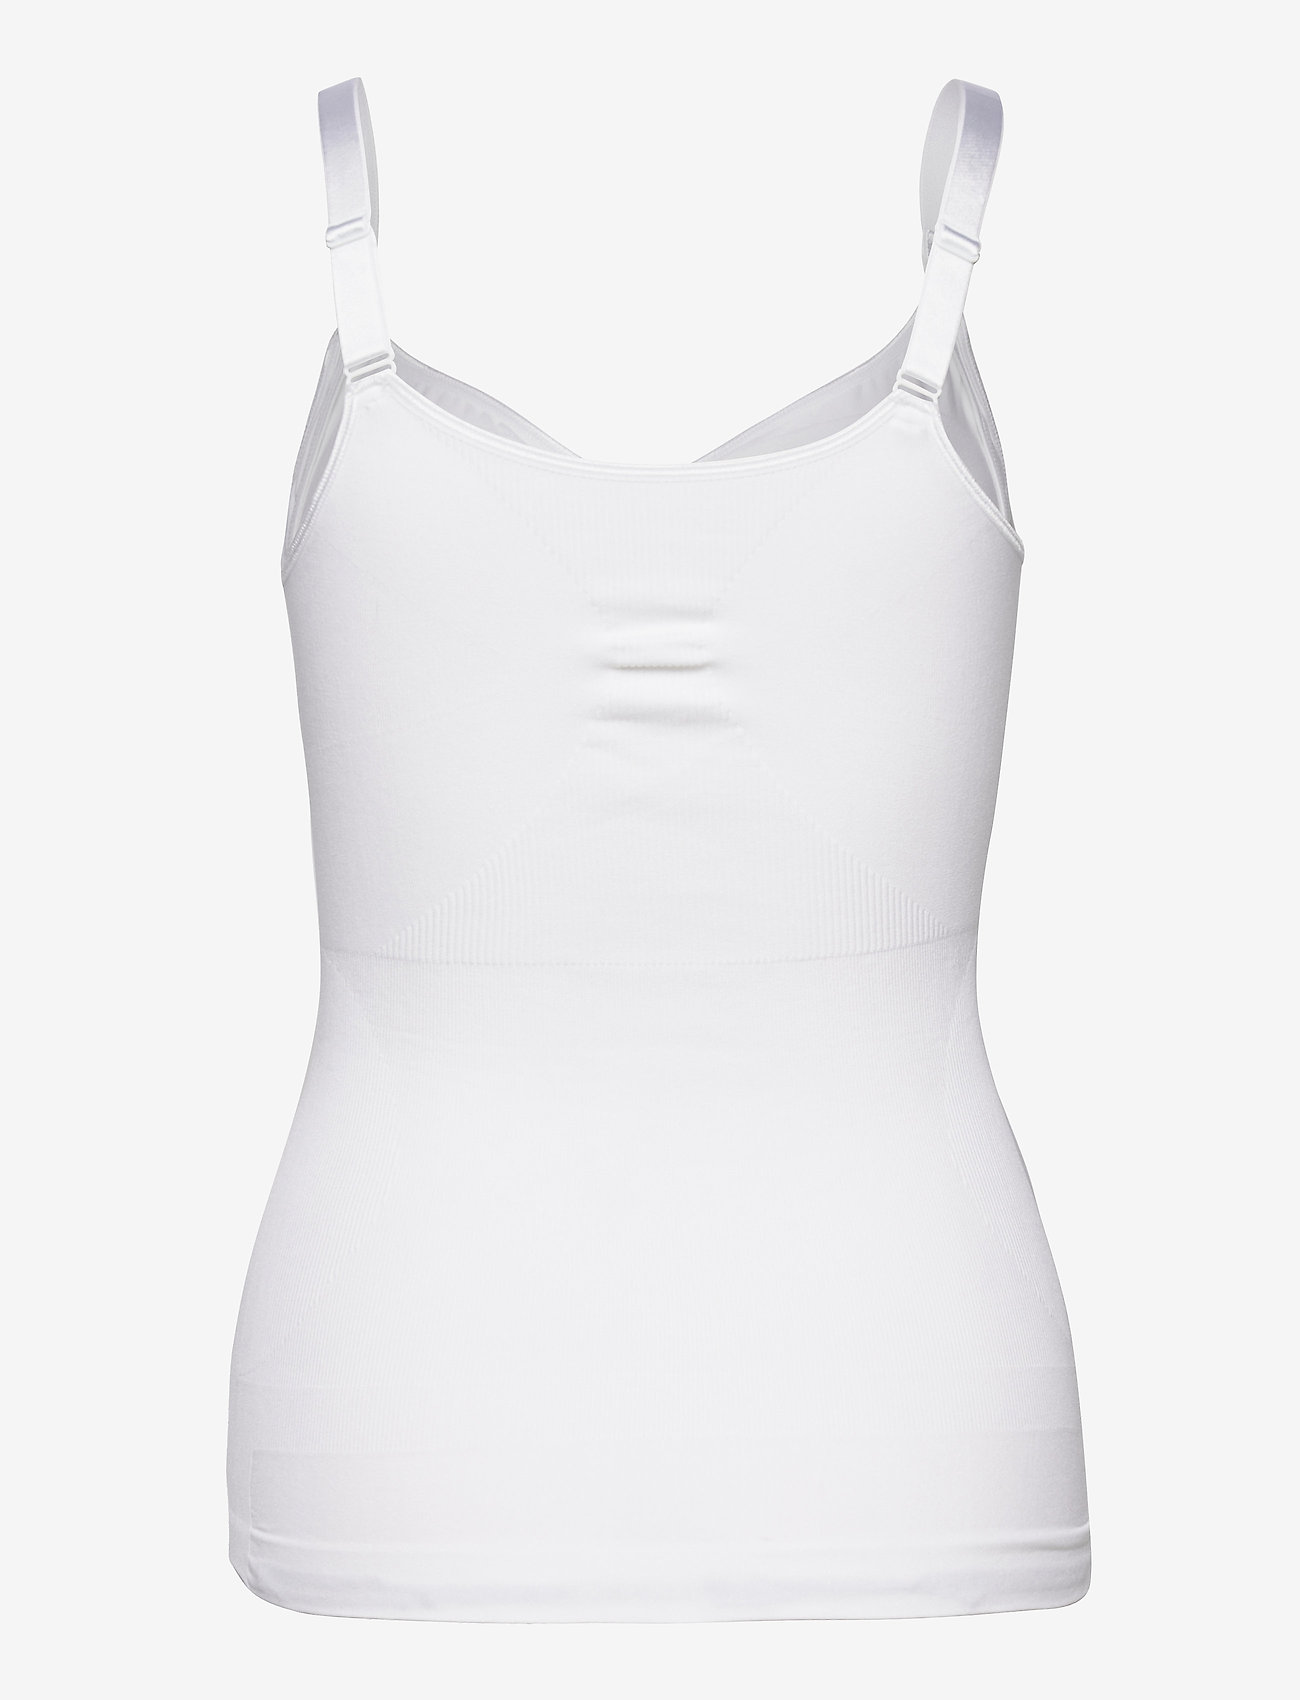 Carriwell - Nursing Top with Shapewear - women - white - 1